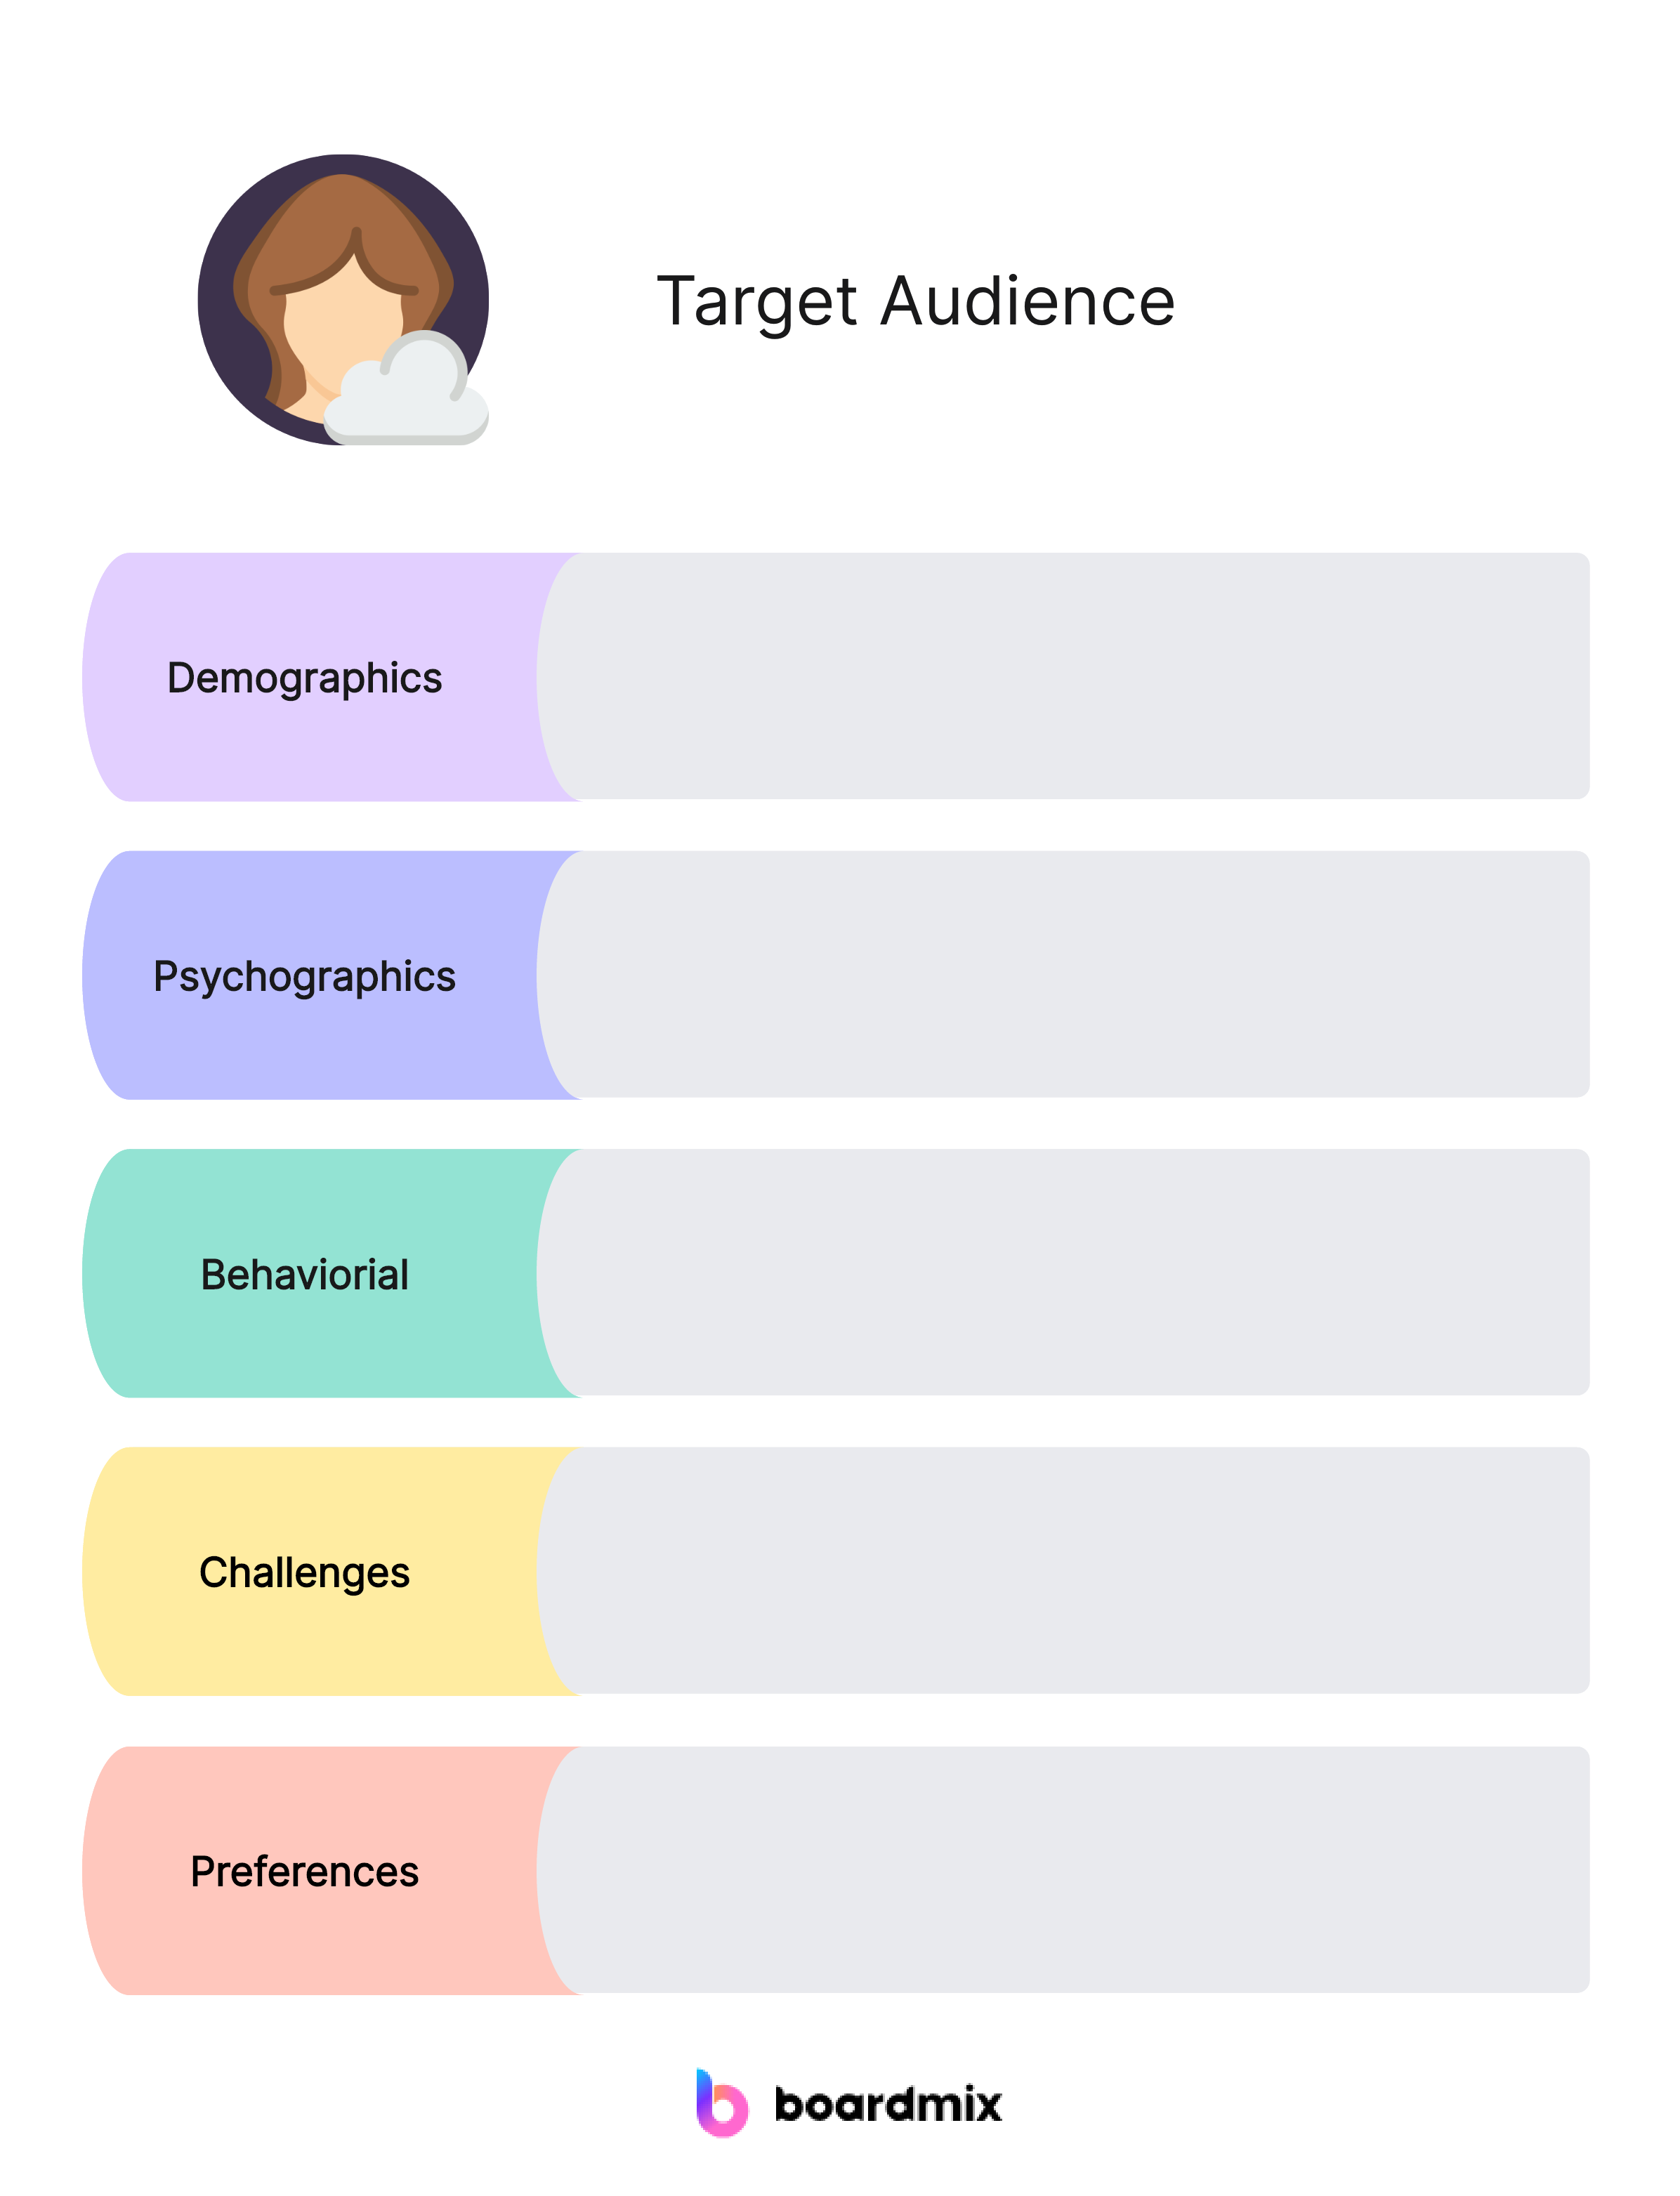 Understanding the Importance of Identifying and Connecting with Your Target Audience